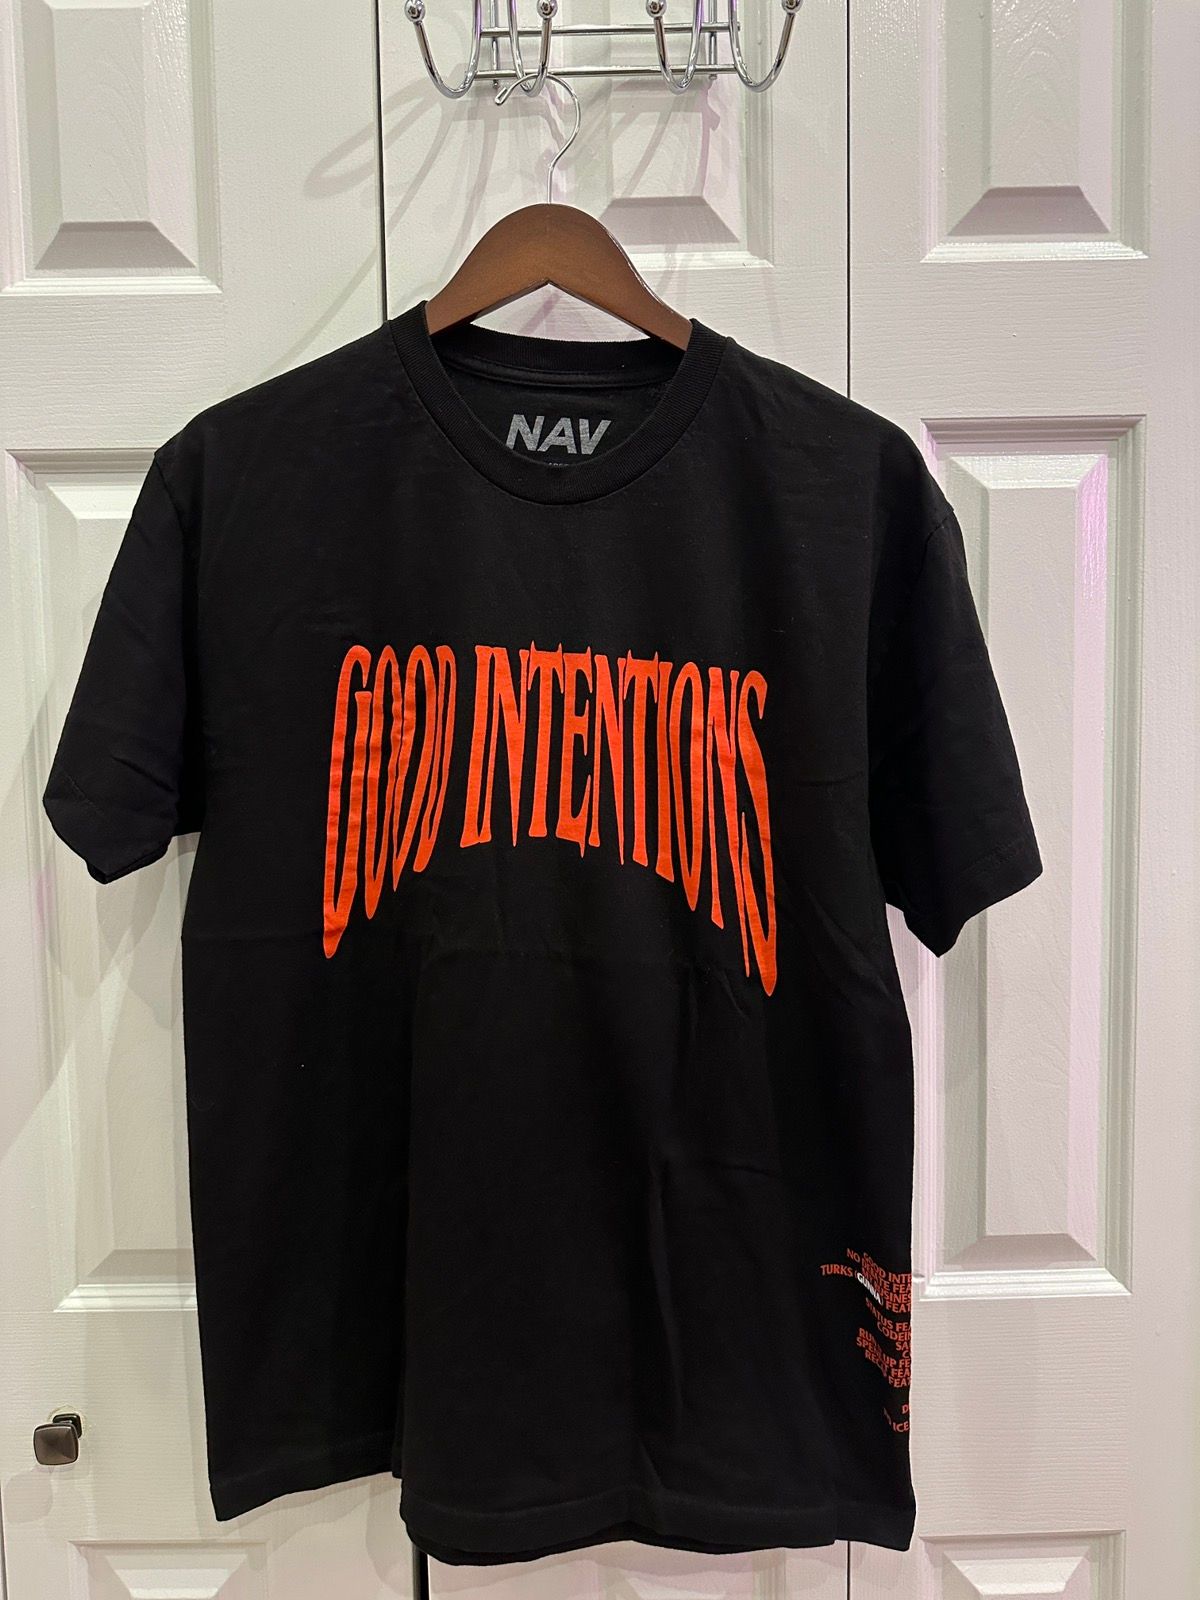 Vlone Vlone X Nav “Good Intentions” Tee Size US L / EU 52-54 / 3 - 1 Preview